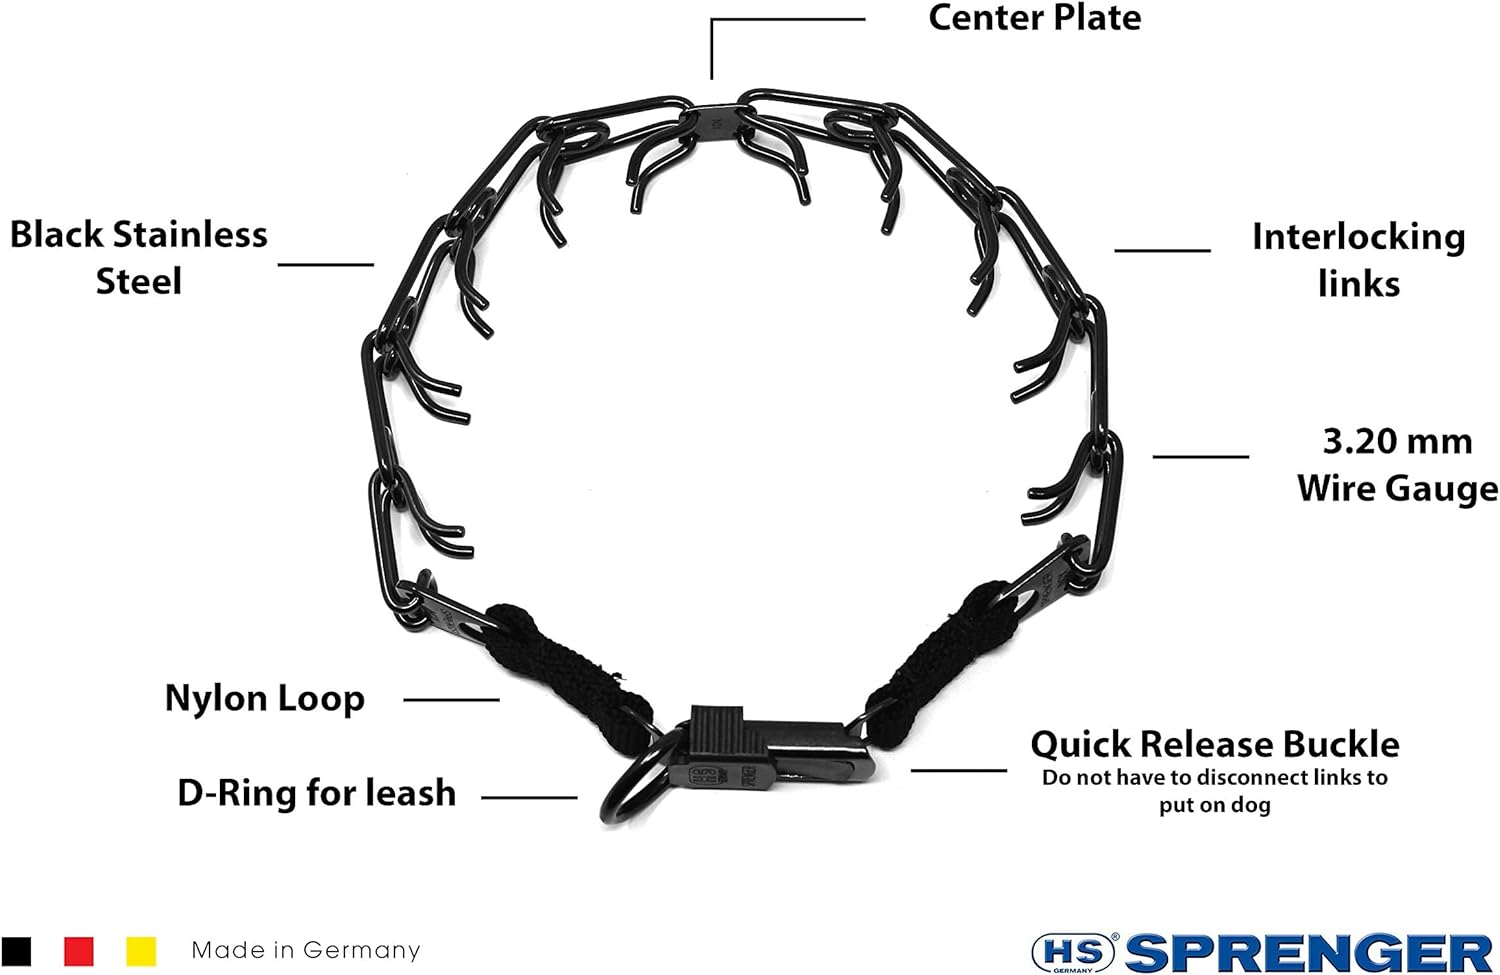 Herm Sprenger Black Stainless Steel Prong Dog Training Collar with Quick Release Buckle Ultra-Plus Pet Pinch Collar No-Pull Collar for Dogs Made in Germany 3.2mm x 20in Medium